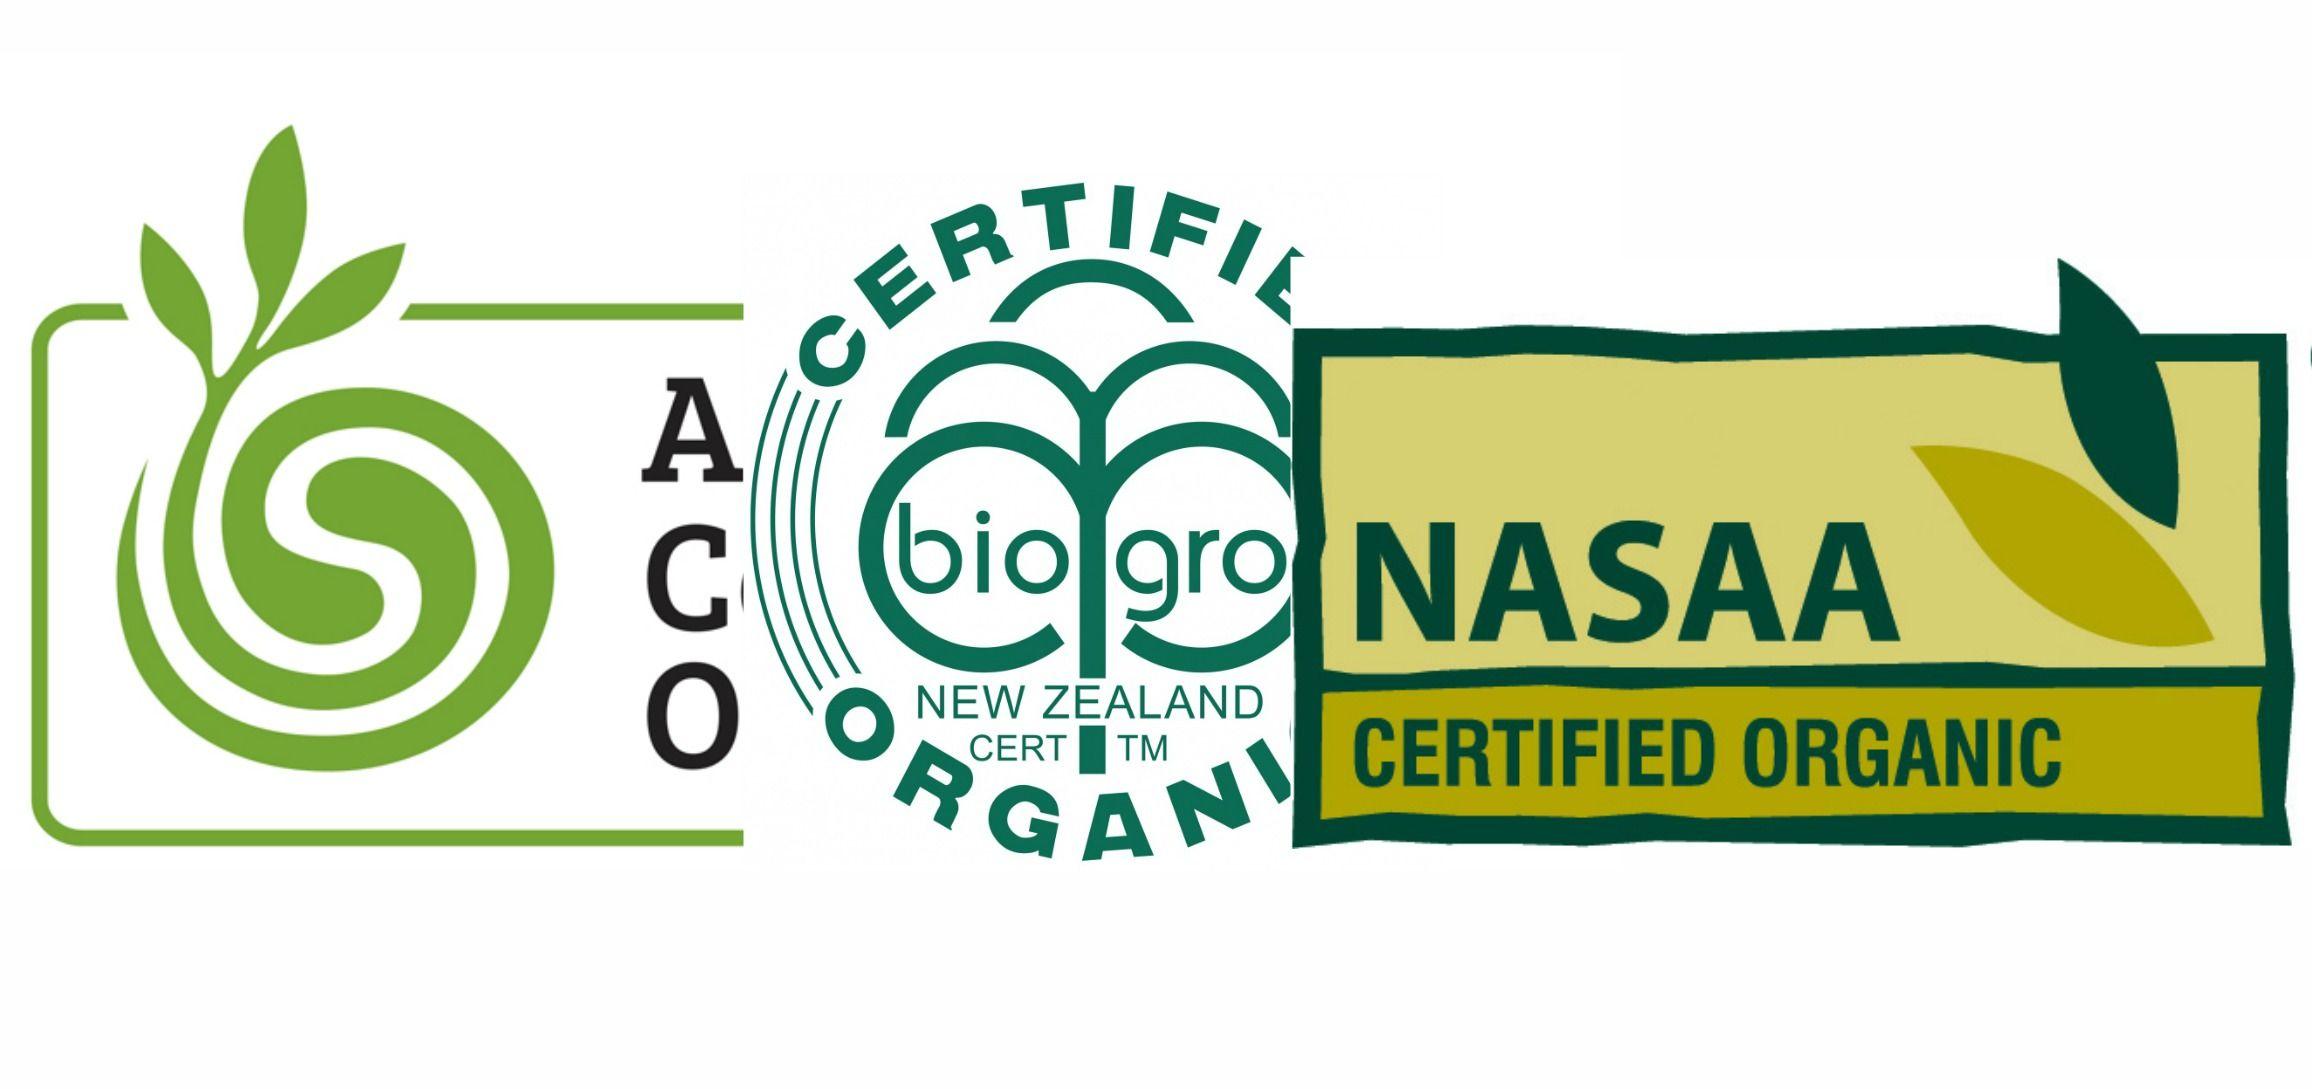 NASAA Logo - To Be, Or Not To Be Certified Authenticity?